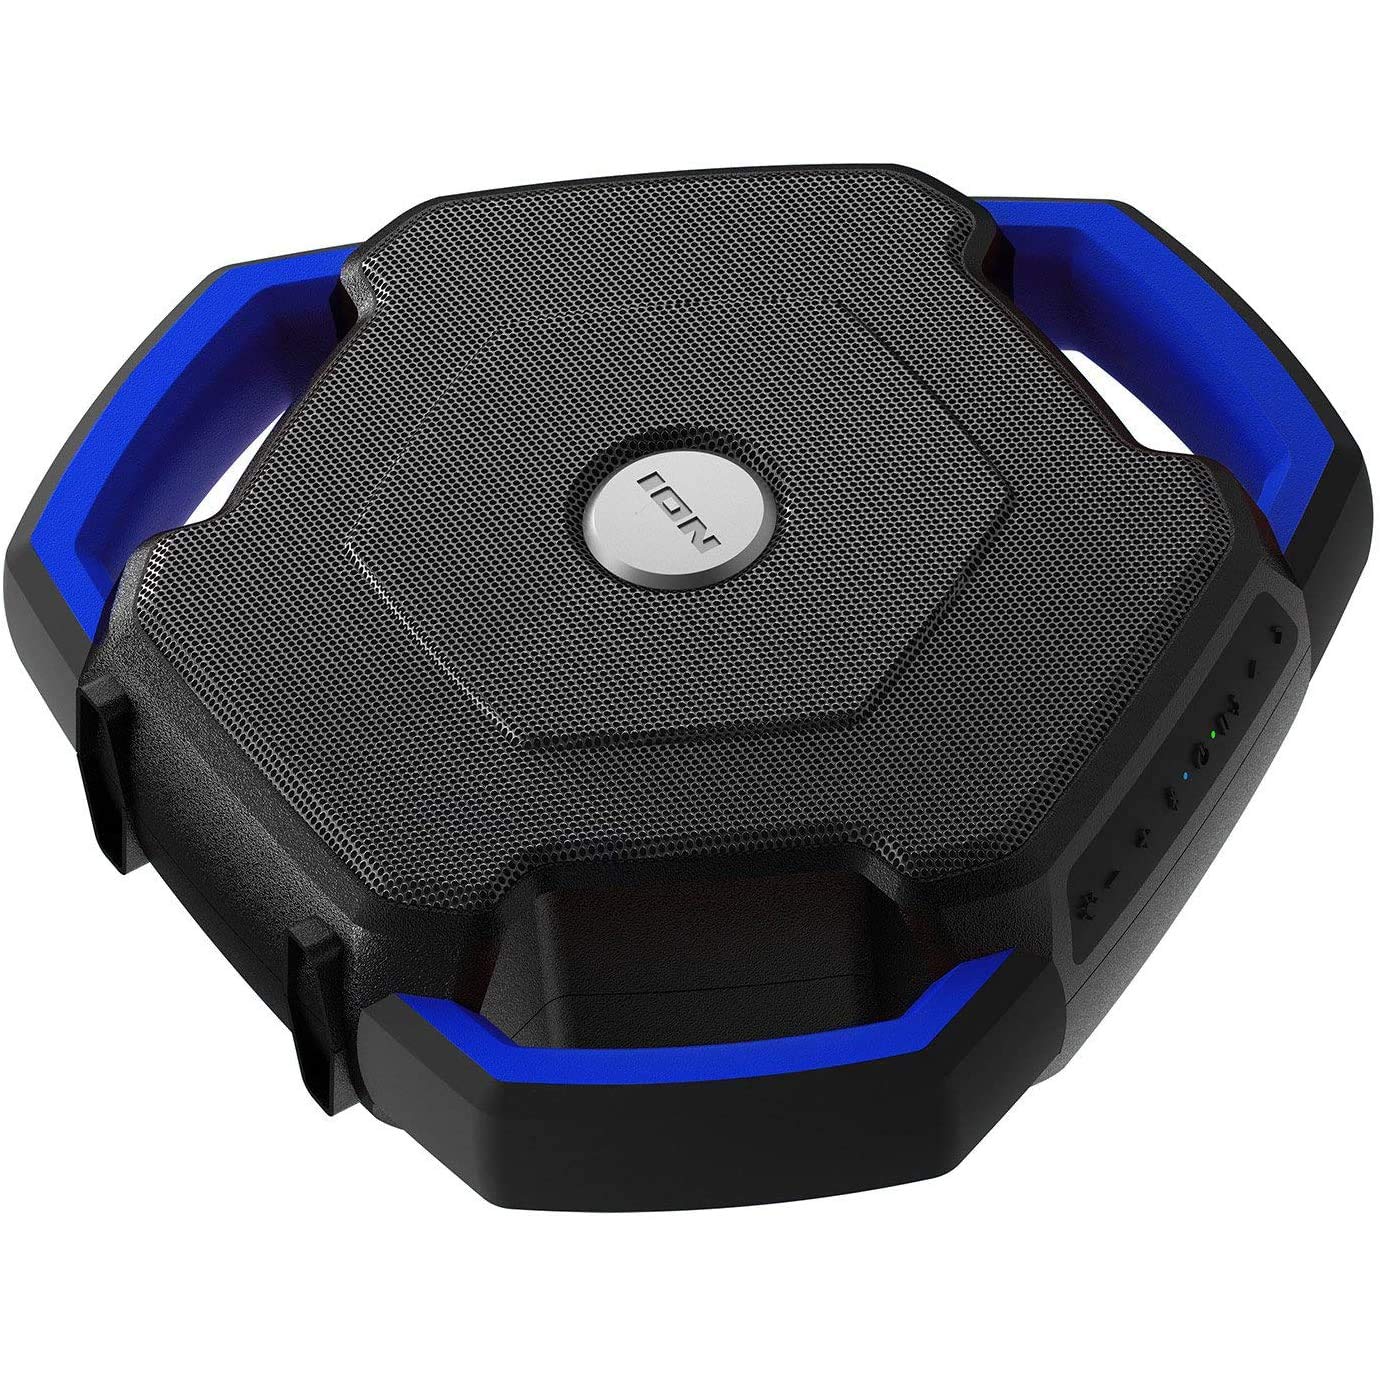 ION Audio iSP106BL Wave Rider Waterproof Bluetooth Speaker, Blue, 26W of Dynamic Power Energizes Your Music, 2" Full-Range Speakers Deliver Lifelike Sound, Works with Siri and More